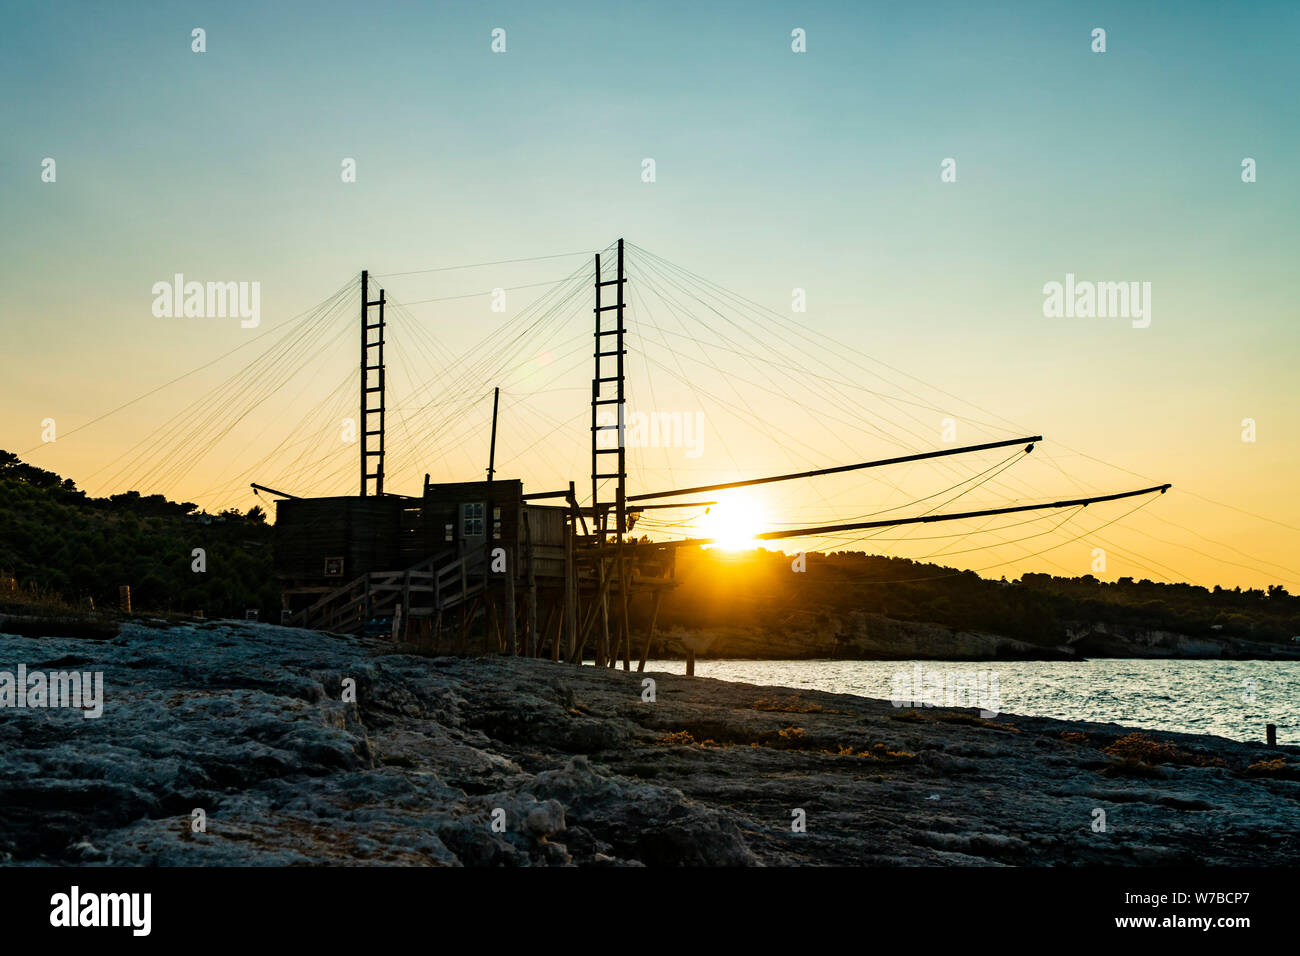 Beautiful seascape with a view of a trabucco at sunset in Italy Stock Photo